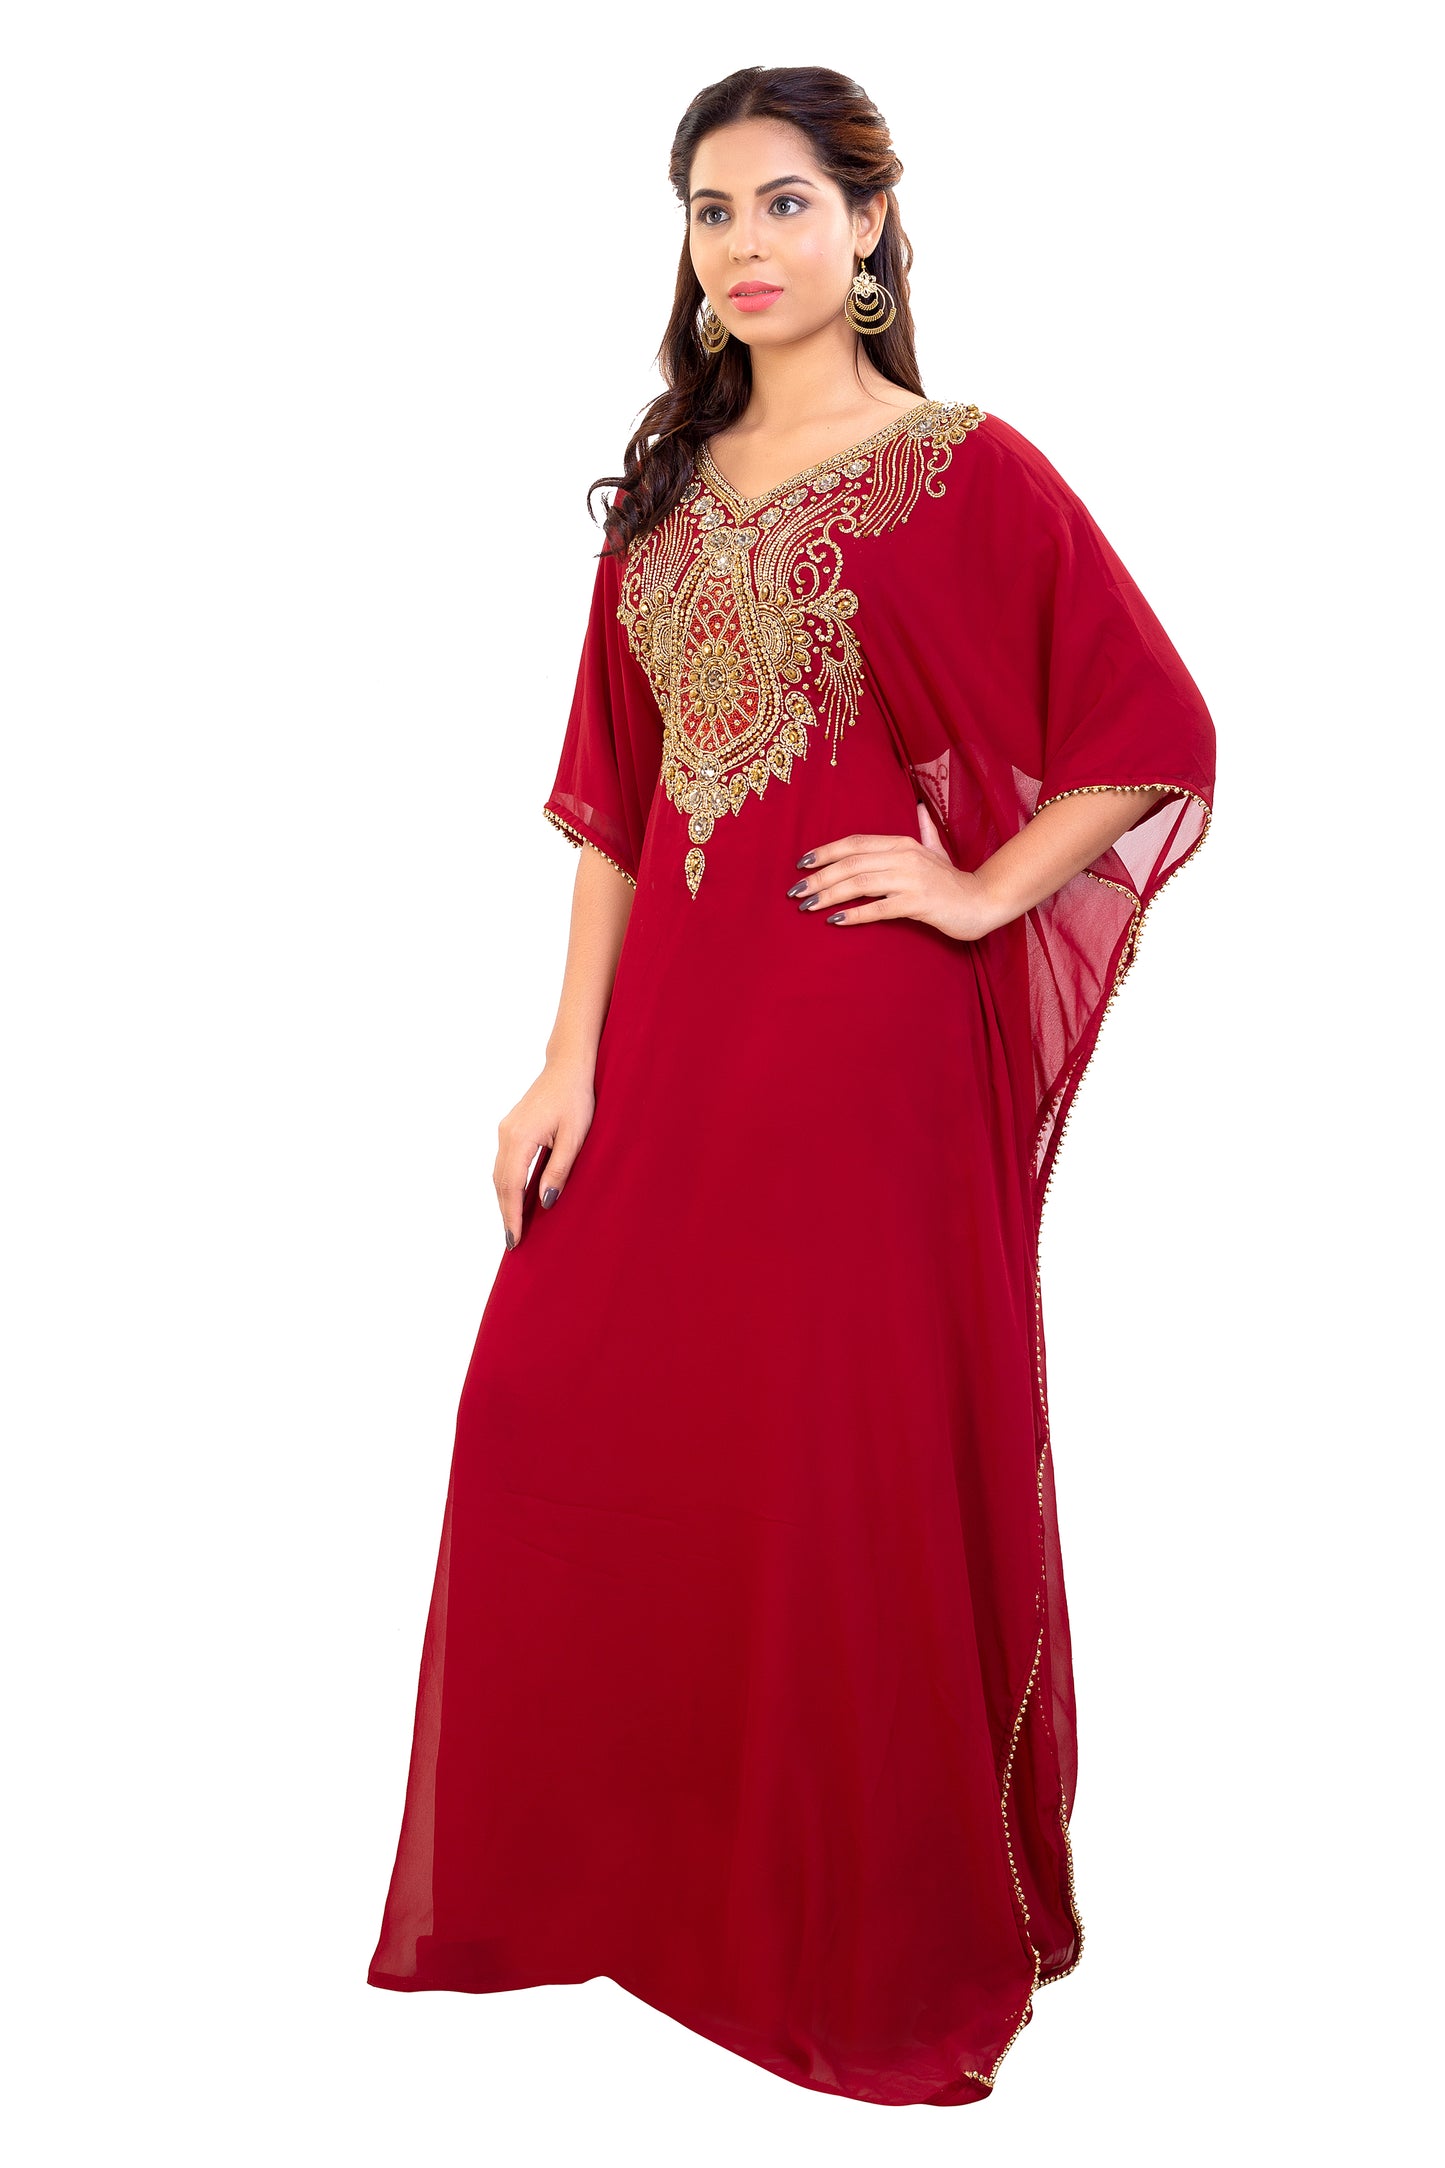 Dubai Kaftan With Intricately Embroidered Back Side of the Maxi - Maxim Creation